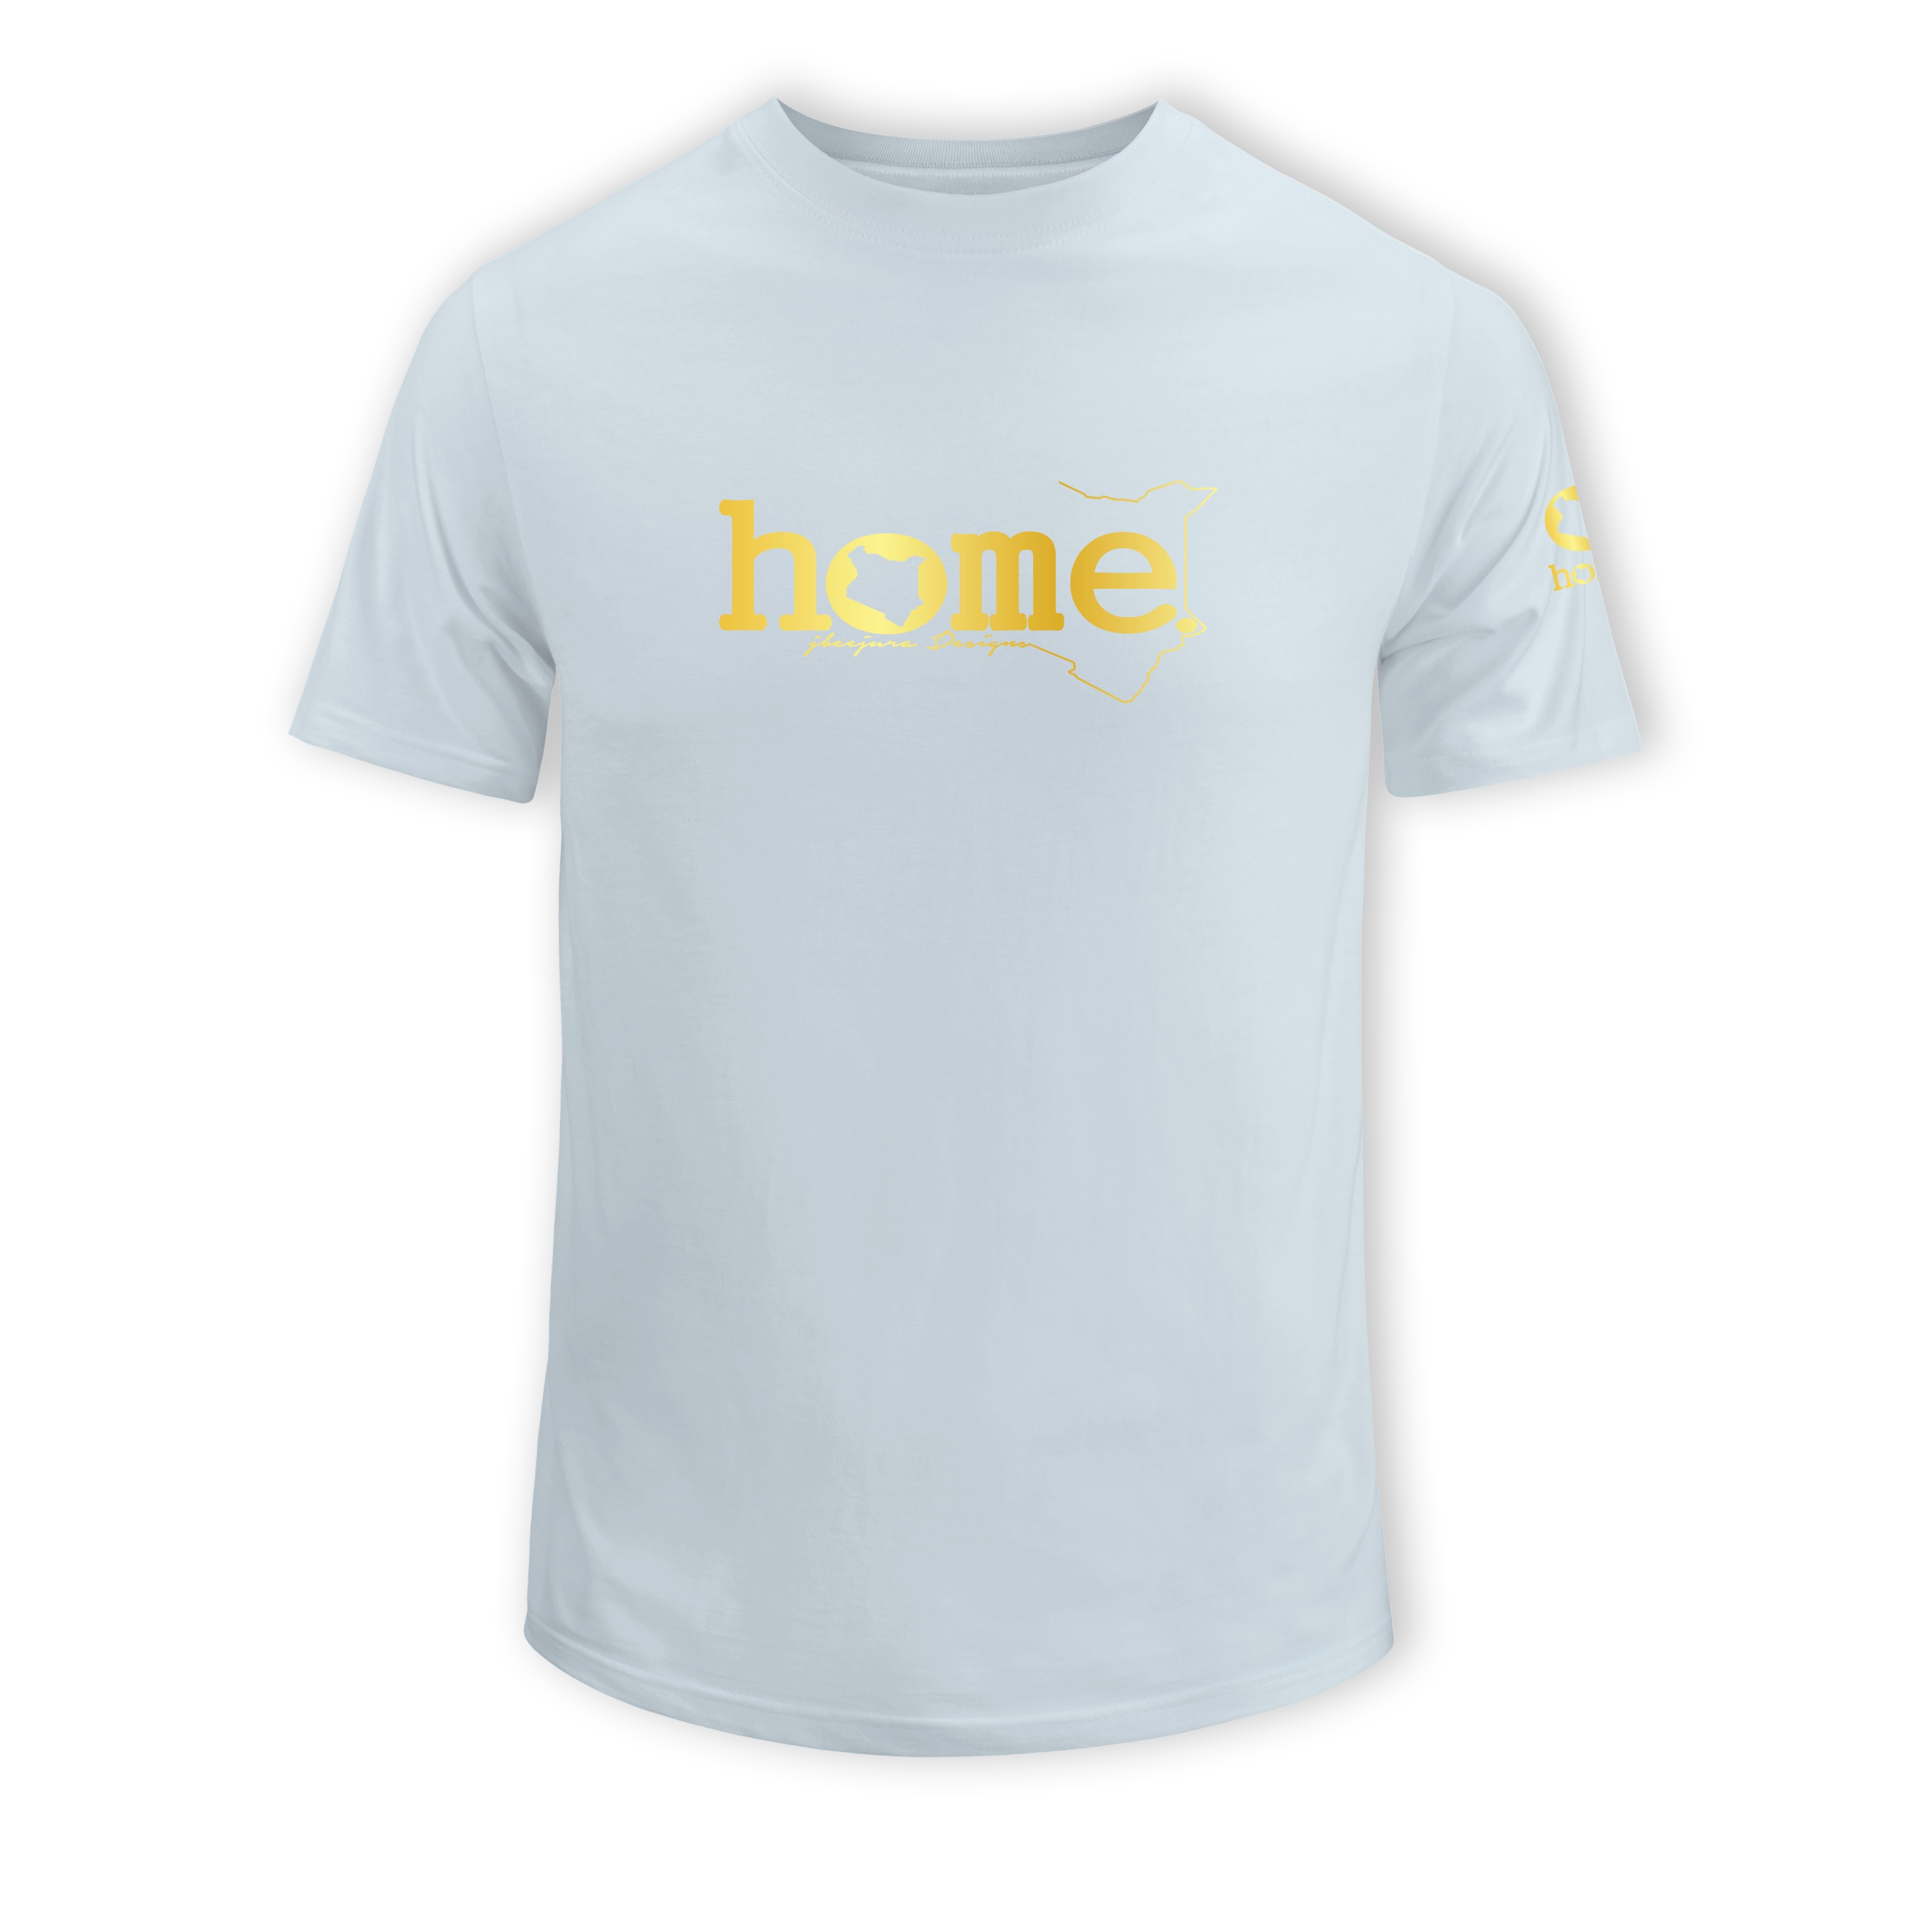 home_254 SHORT-SLEEVED SKY-BLUE T-SHIRT WITH A GOLD CLASSIC WORDS PRINT – COTTON PLUS FABRIC